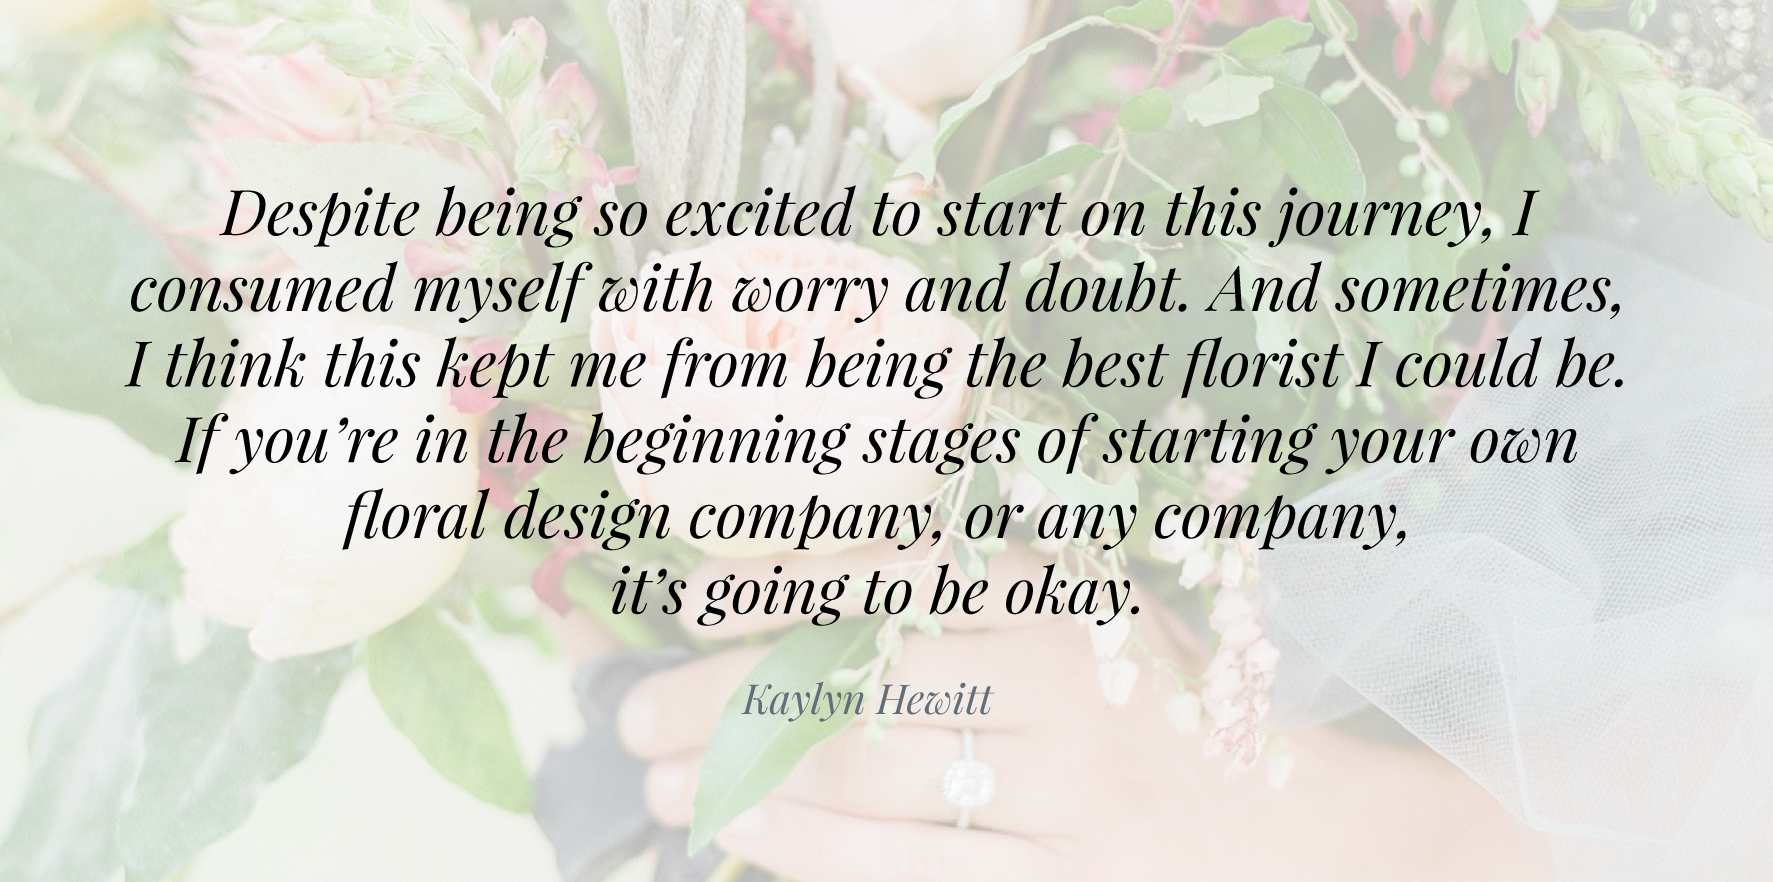  Five Things I Wish I Knew Before Opening a Flower Shop | Advice for entrepreneurs | The School of Styling - A three-day hands-on workshop for creative entrepreneurs. | Written by Kaylyn Hewitt of  1956blooms  .   http://www.theschoolofstyling.com  